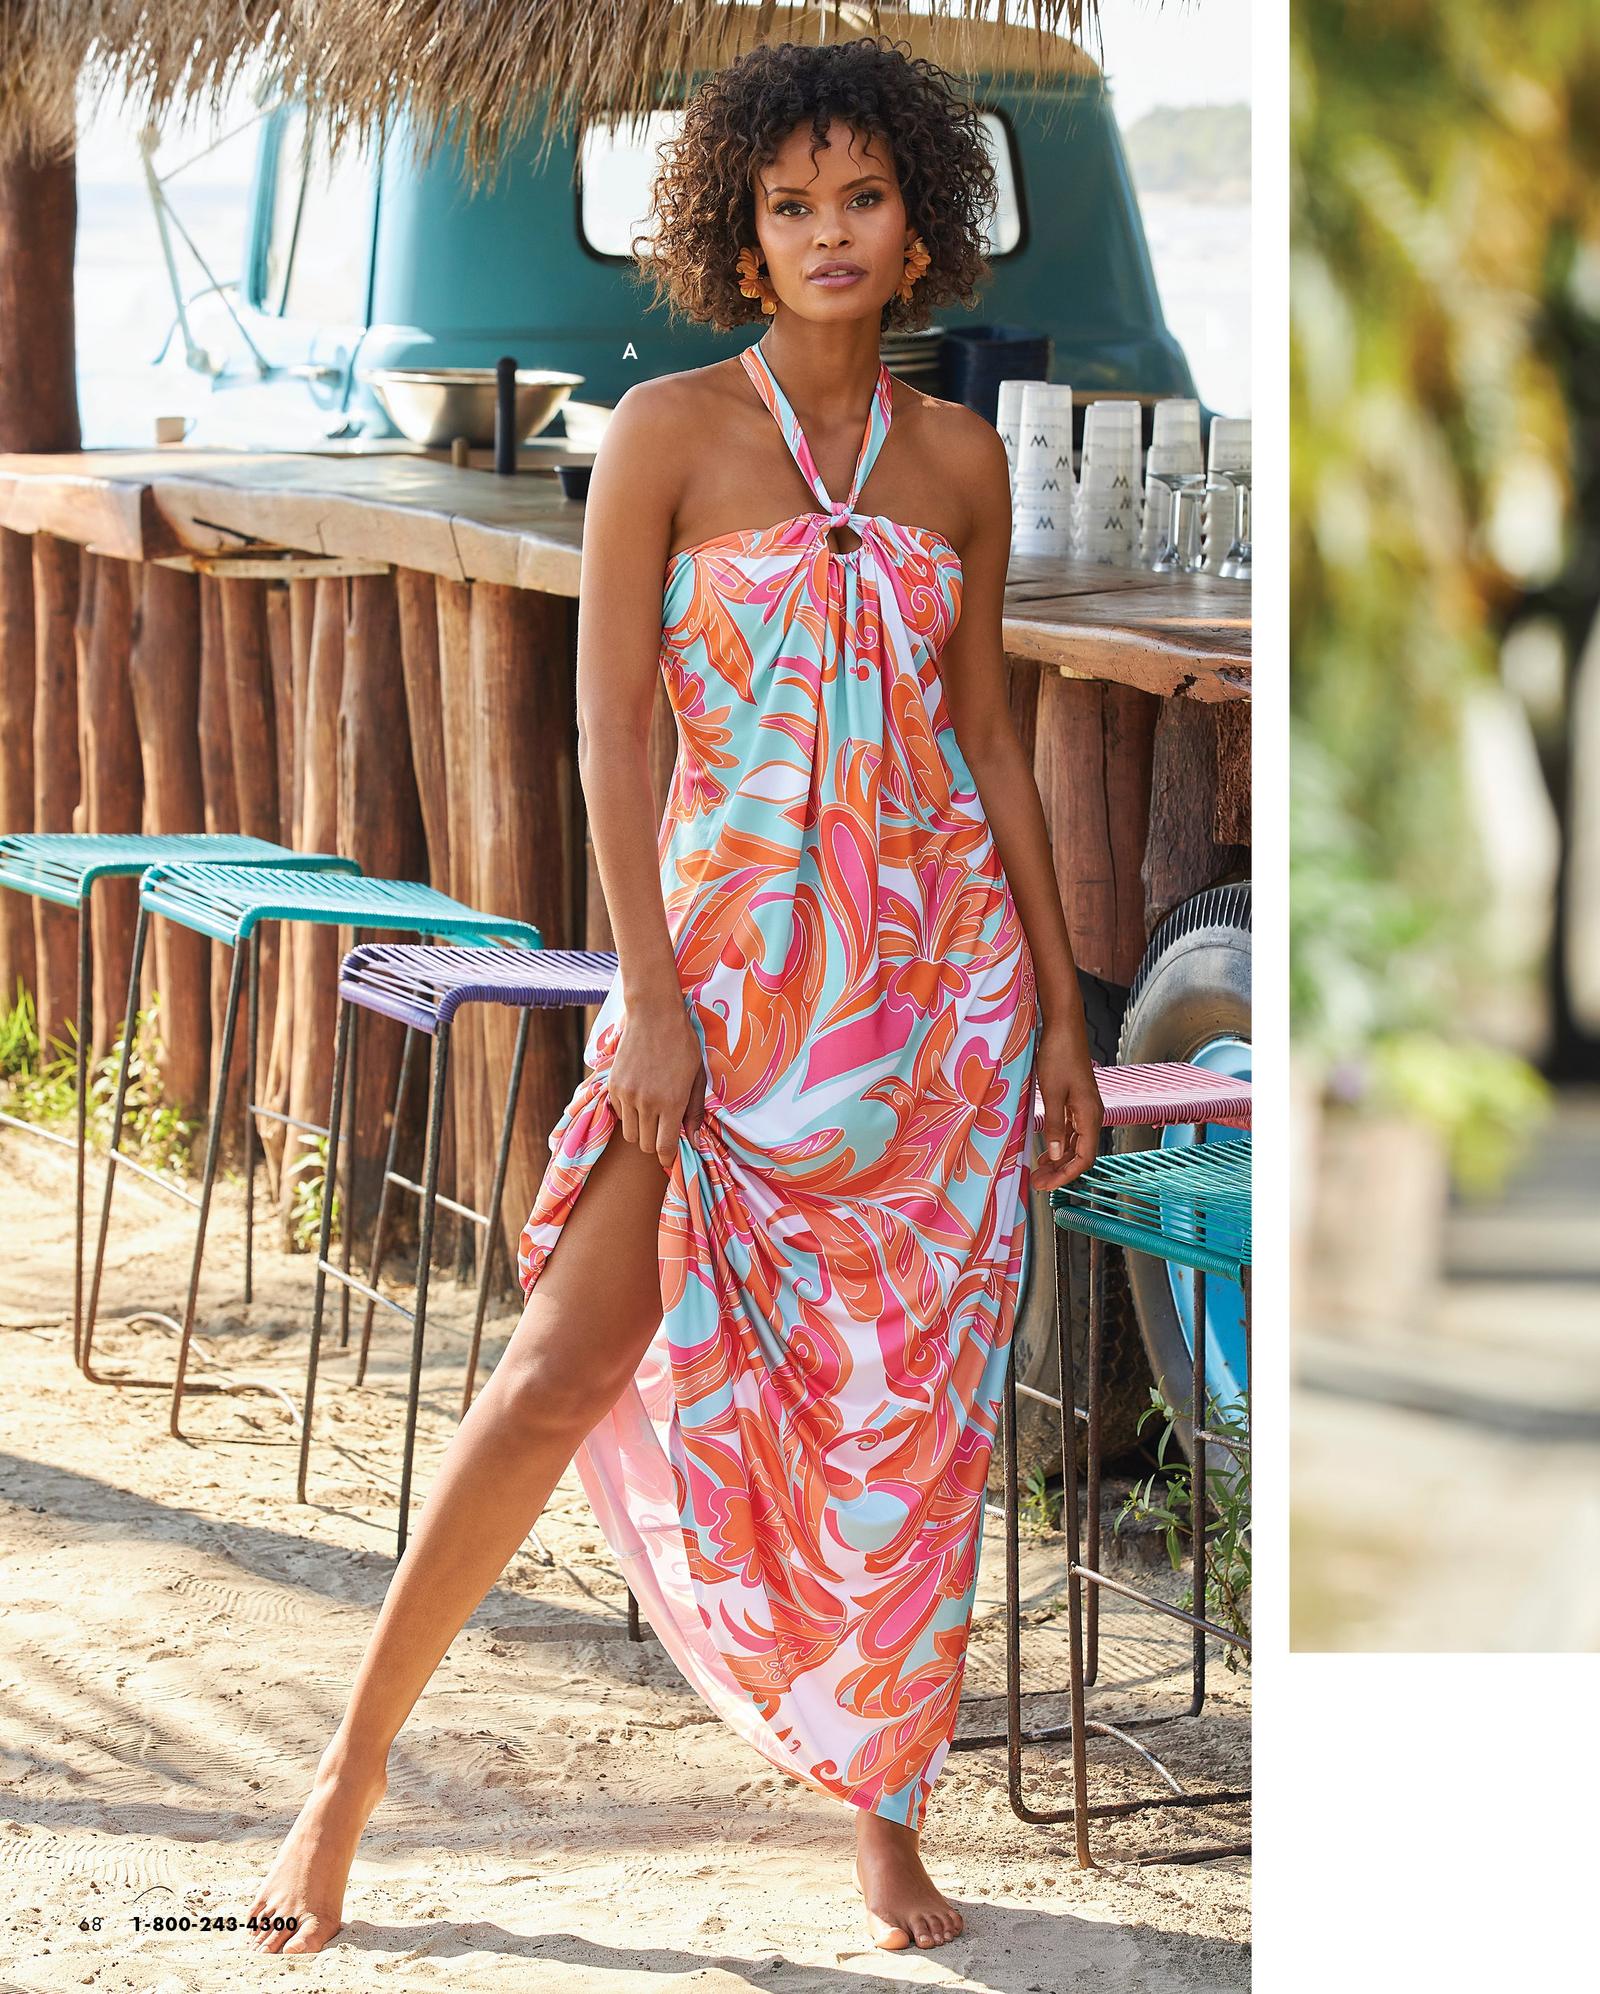 model wearing a printed multicolored halter-neck maxi dress.